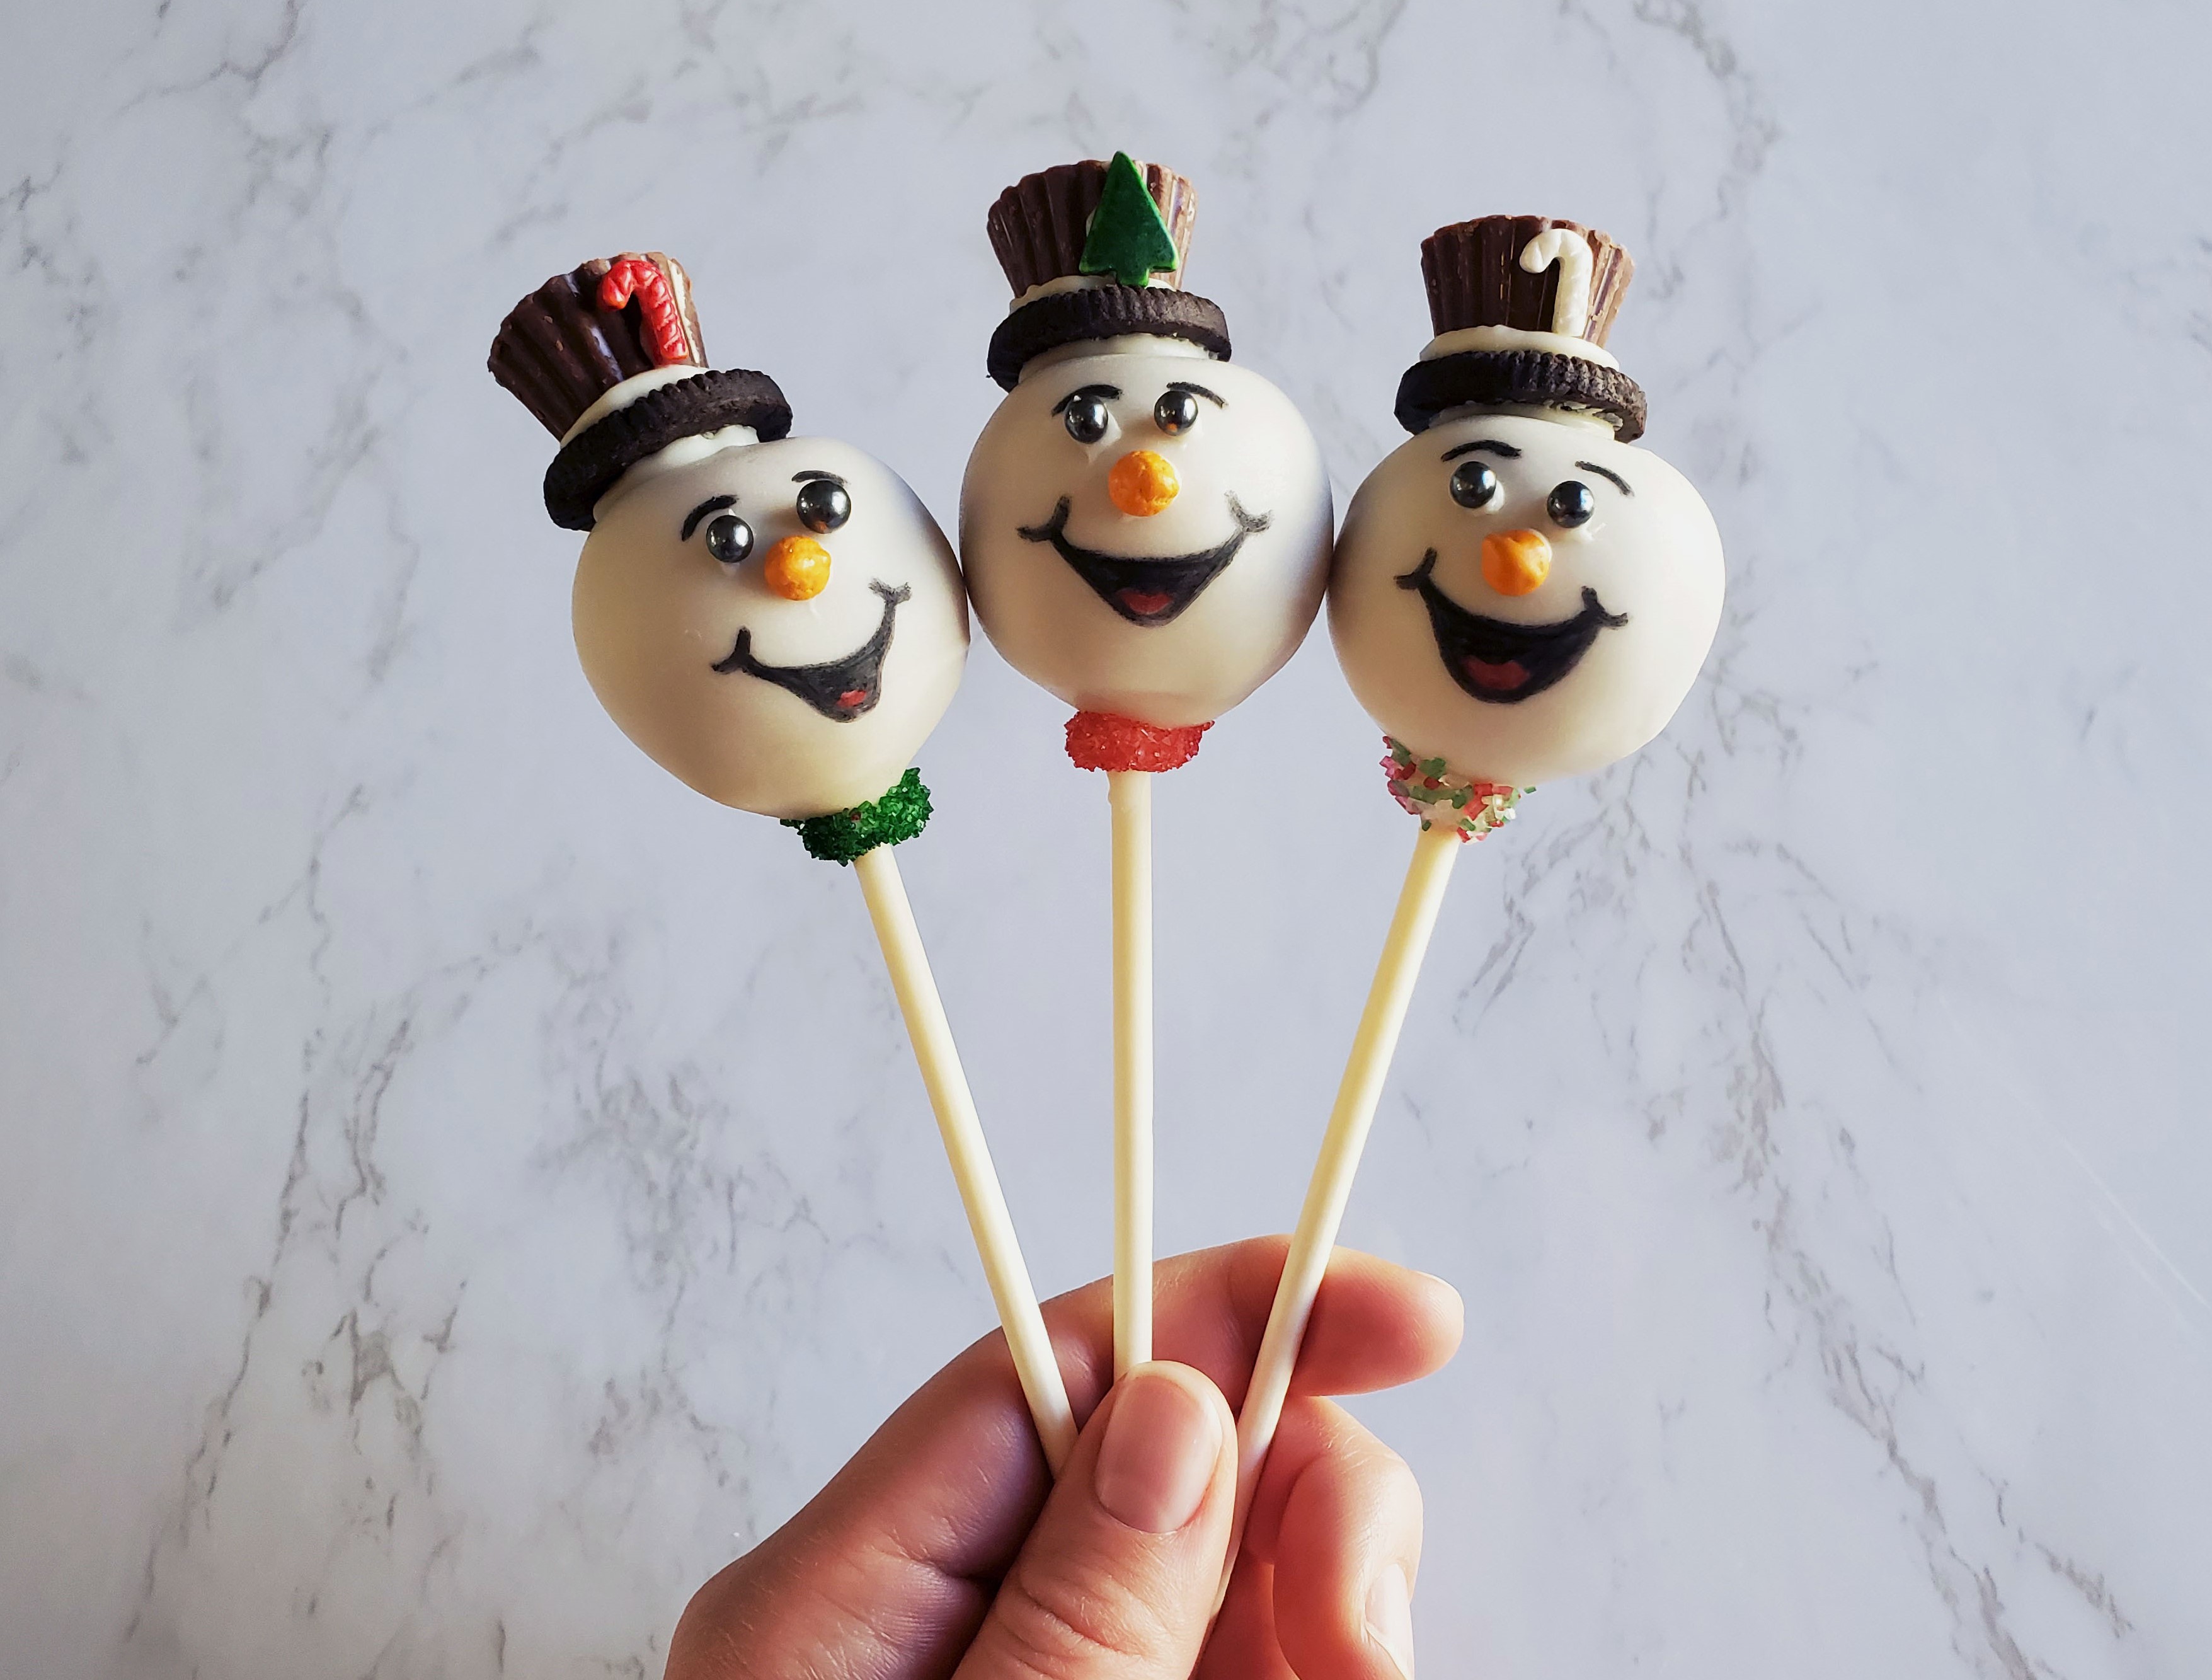 Three snowman cake pops with Reese's/oreo top hats and faces draw on with food markers.